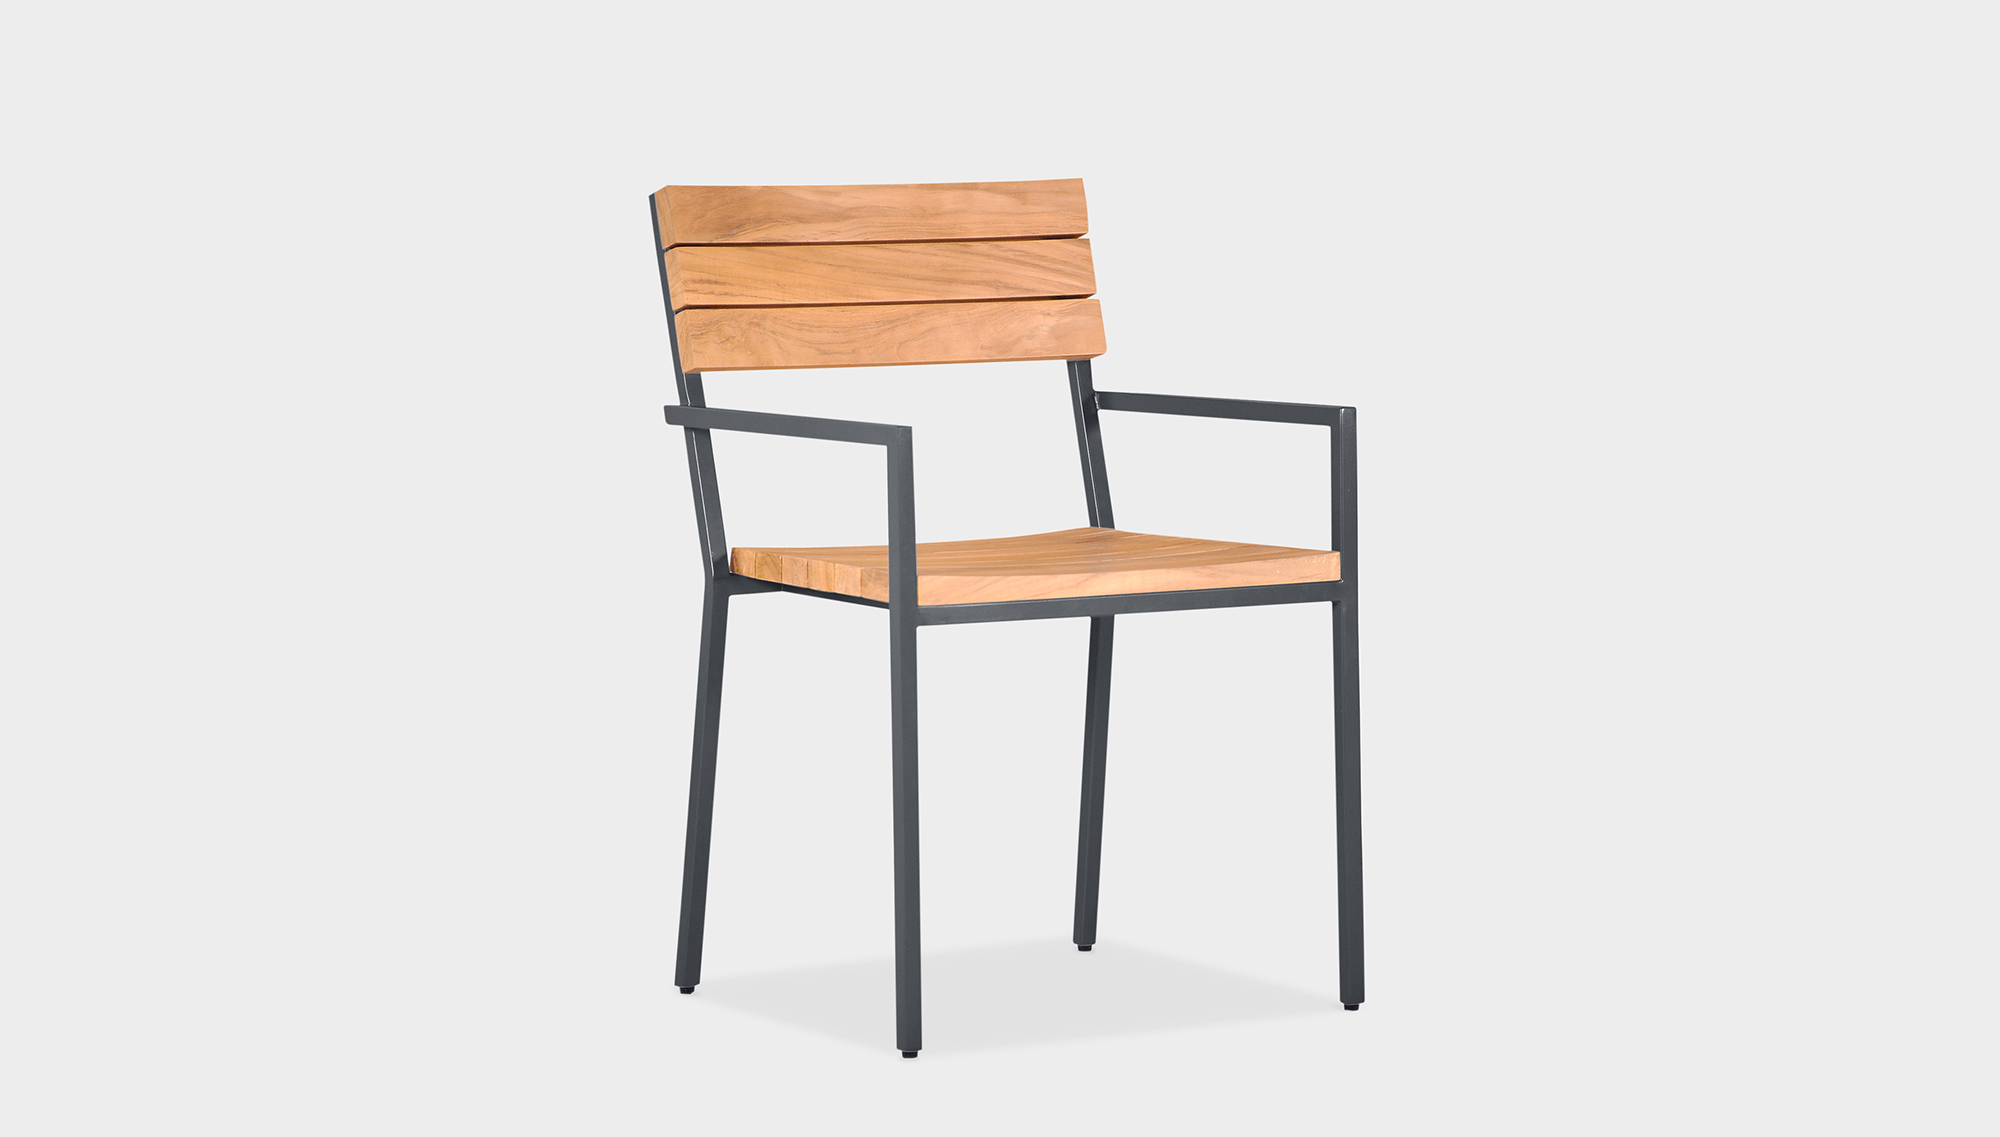 reddie-raw outdoor seating 52W x 50D x 80H *cm / Wood Teak~Natural / Metal~Grey Suzy Outdoor Dining Chair with armrest